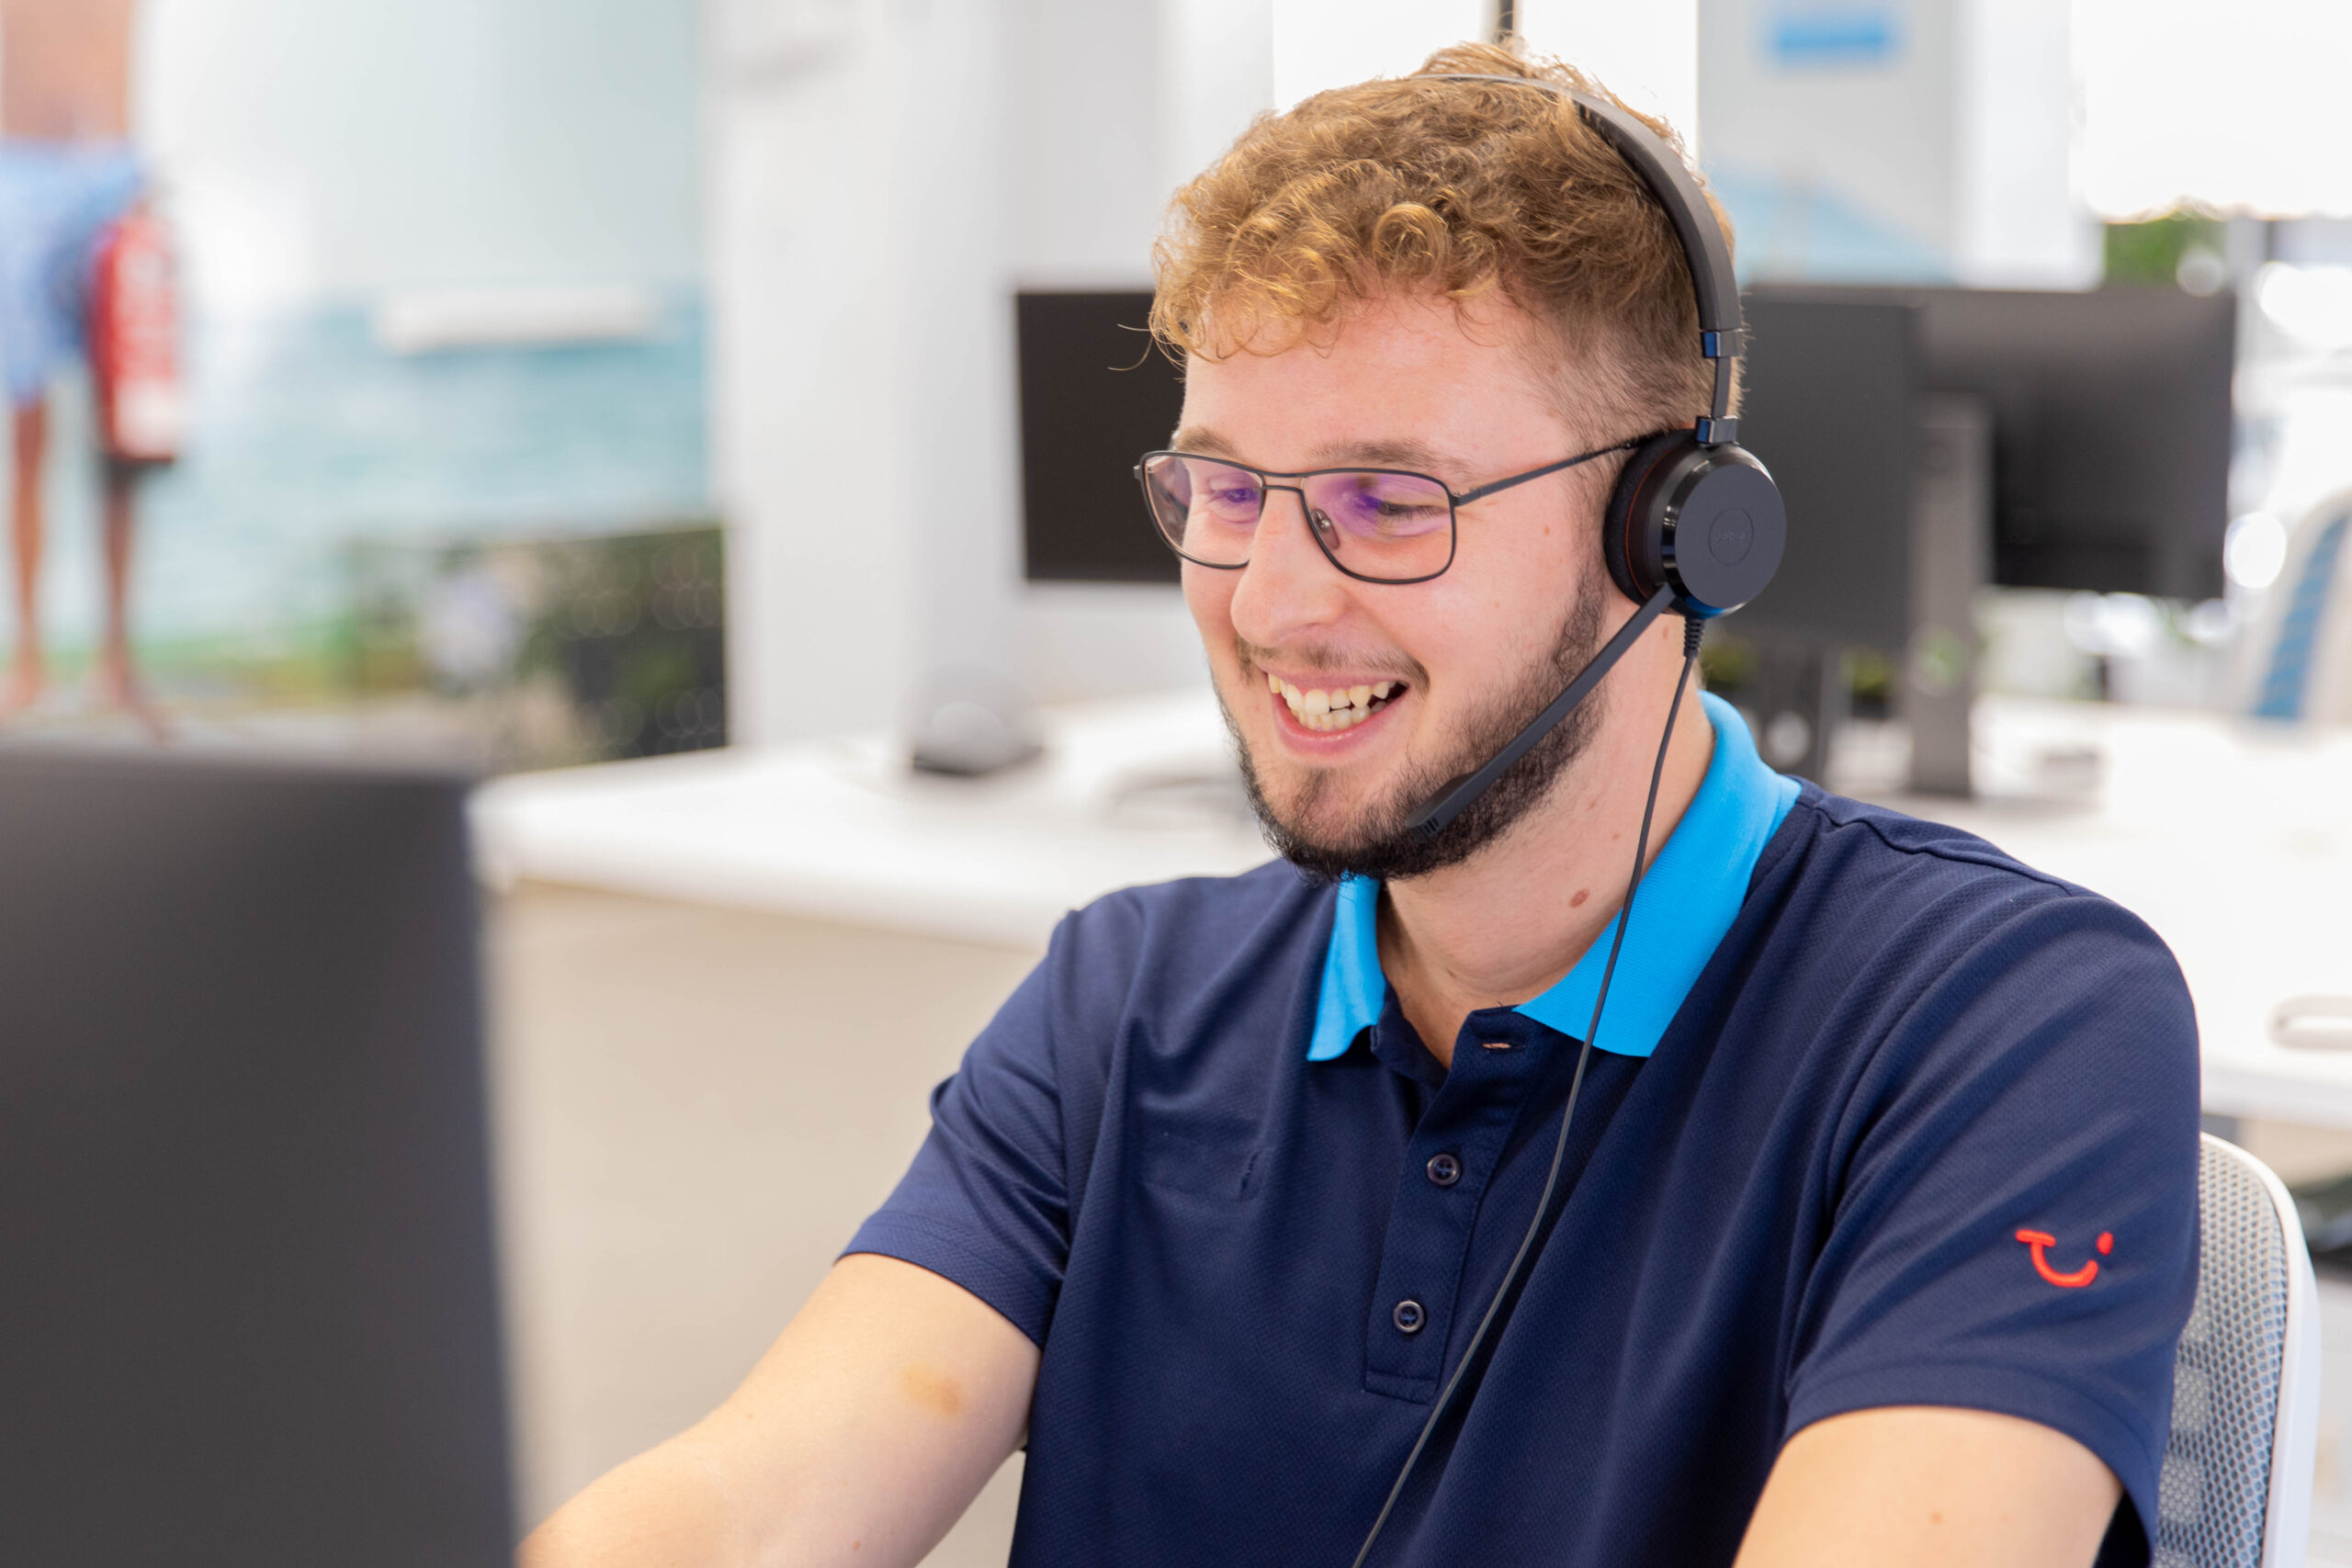 Contact Center agent in TUI uniform smiling at computer with a headset on.